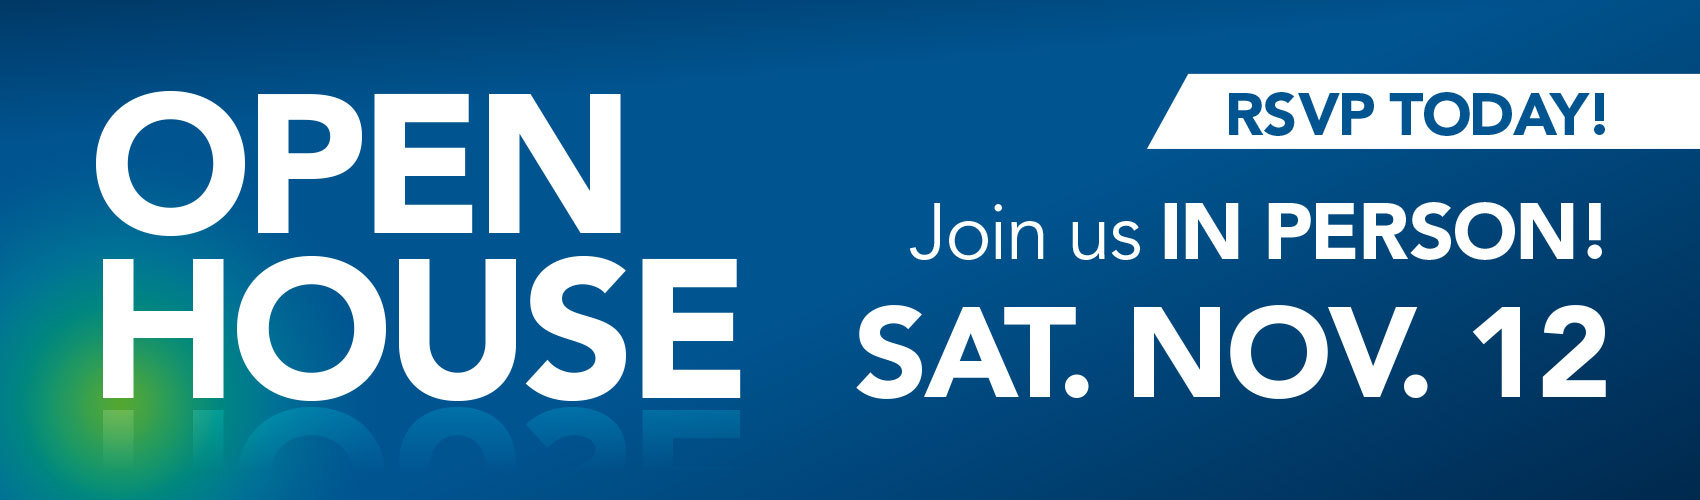 OPEN HOUSE: RSVP today! Join us in person on Saturday, November 12 at all Georgian College campuses